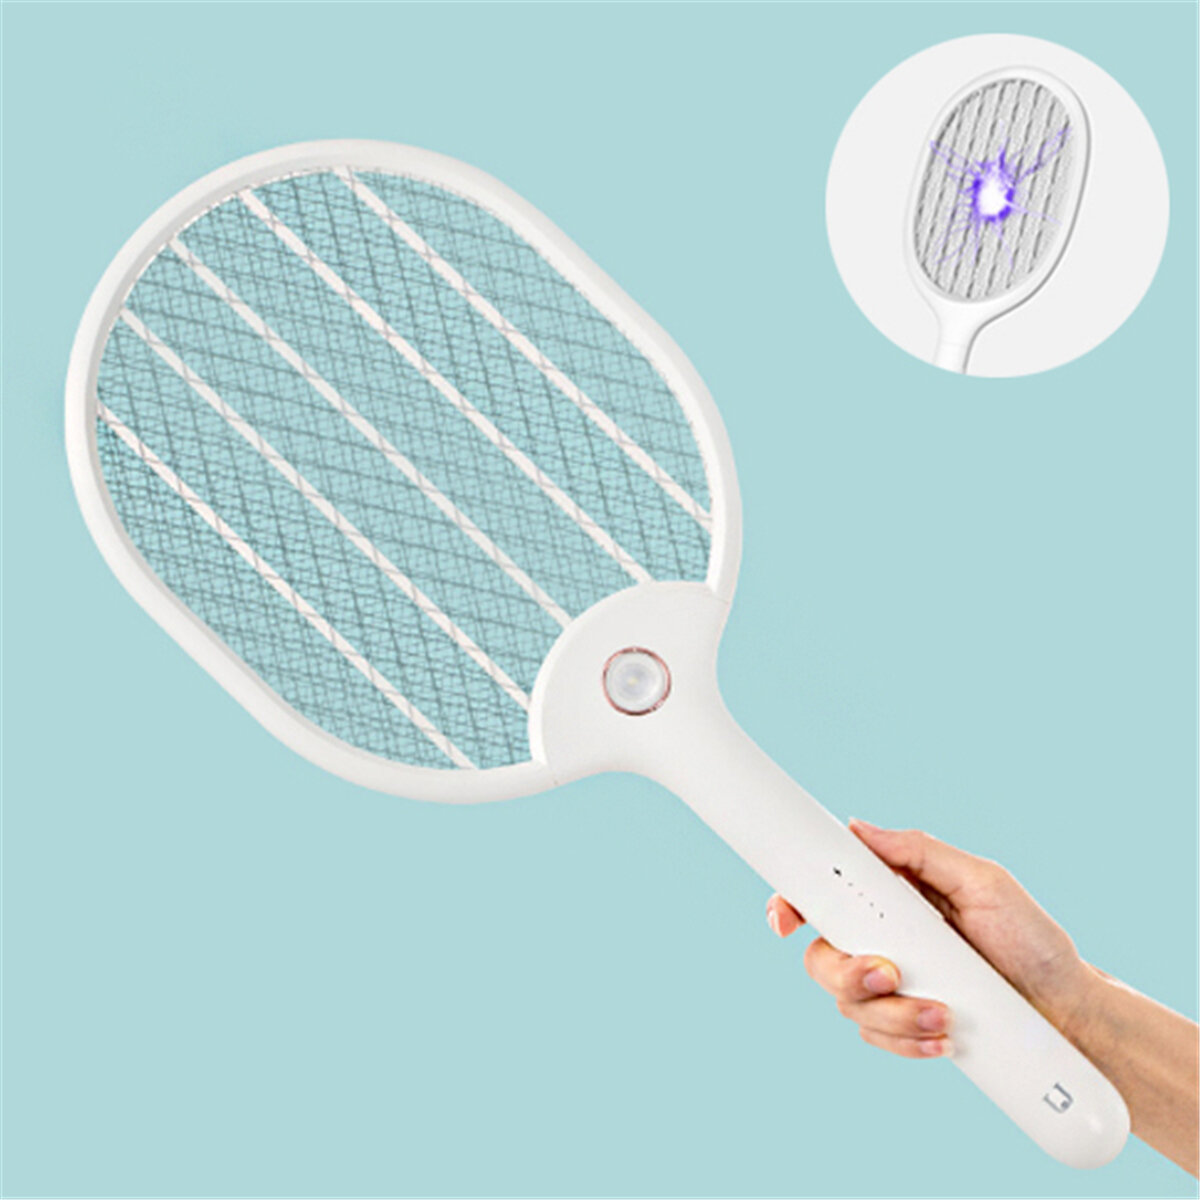 3PCS Jordan&judy 3000V Electric Mosquito Swatter Portable Insect Repellent Travel Three-layer Anti-electric Shock Net US